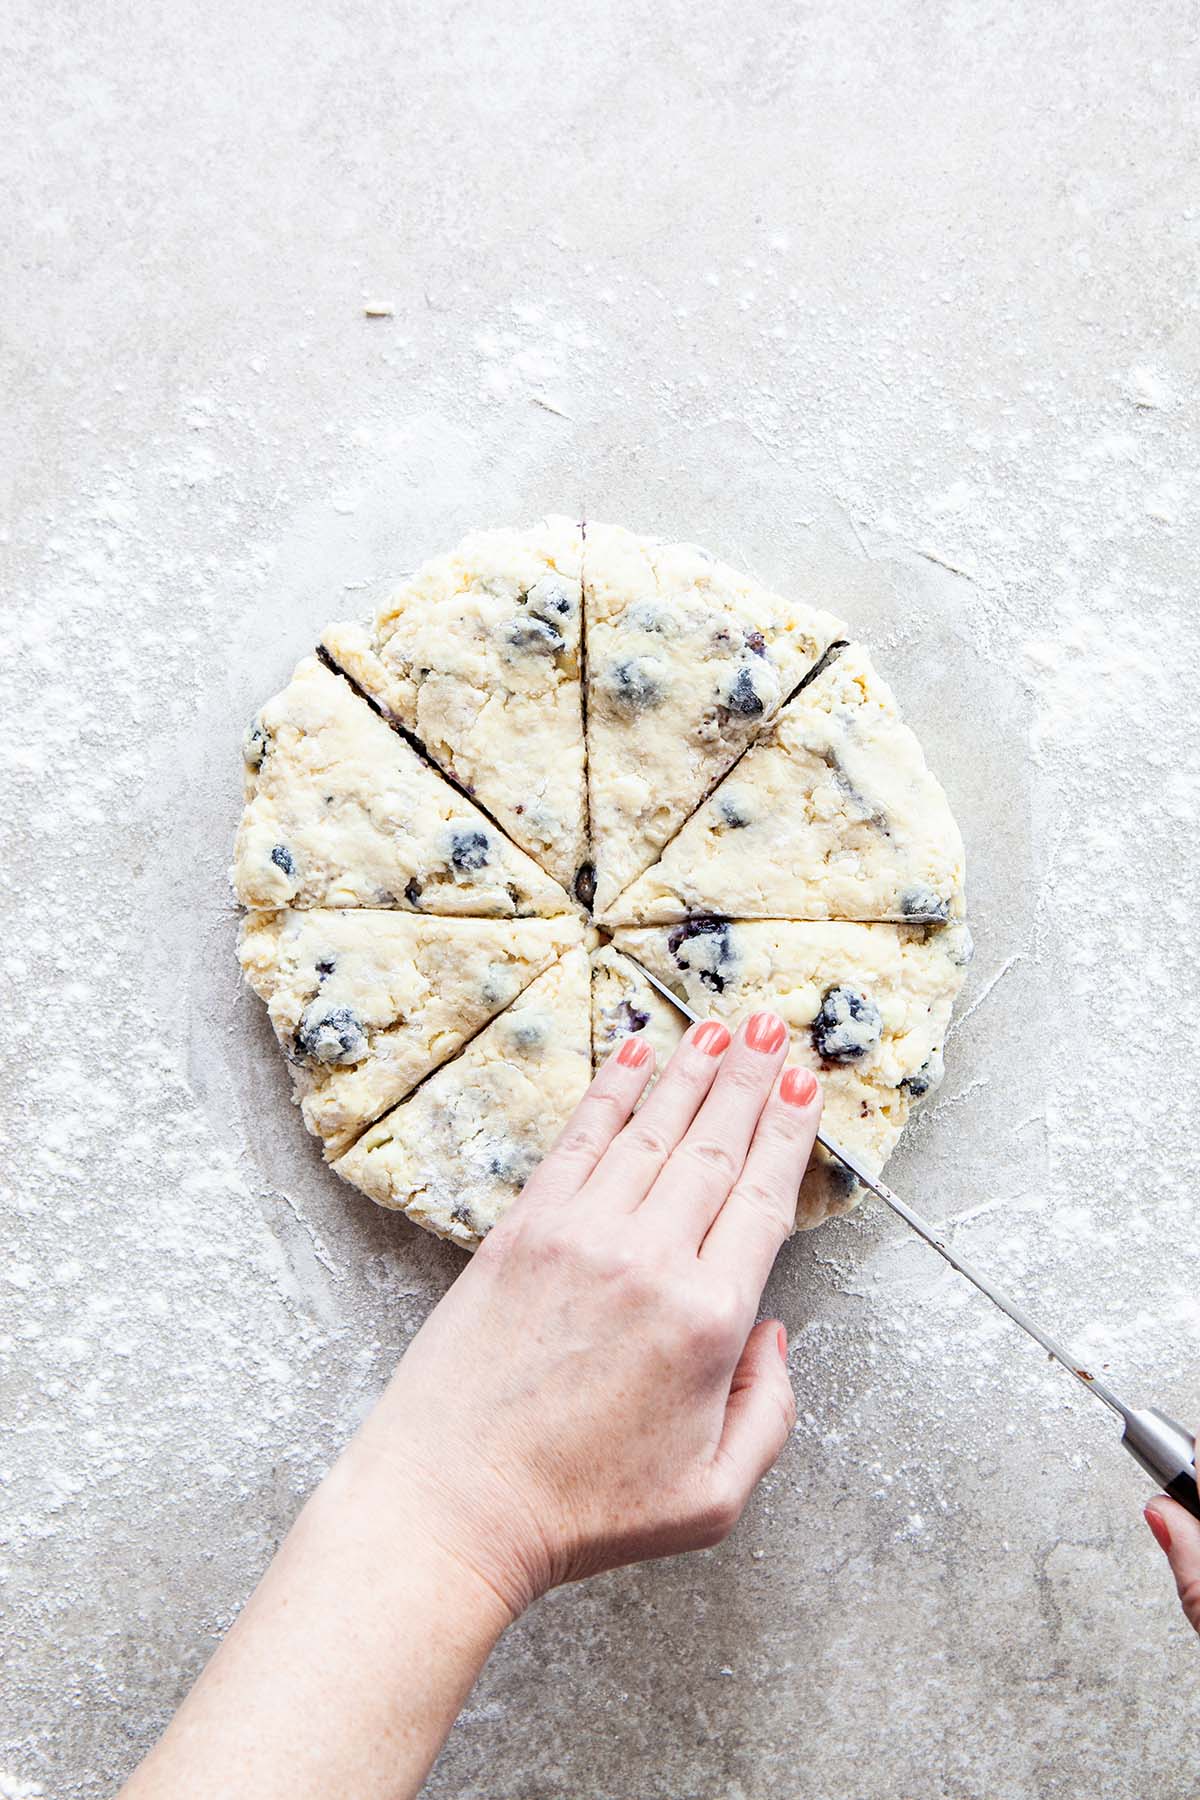 Hands cutting a disc of scone dough into wedges with a long knife on a floured stone surface.